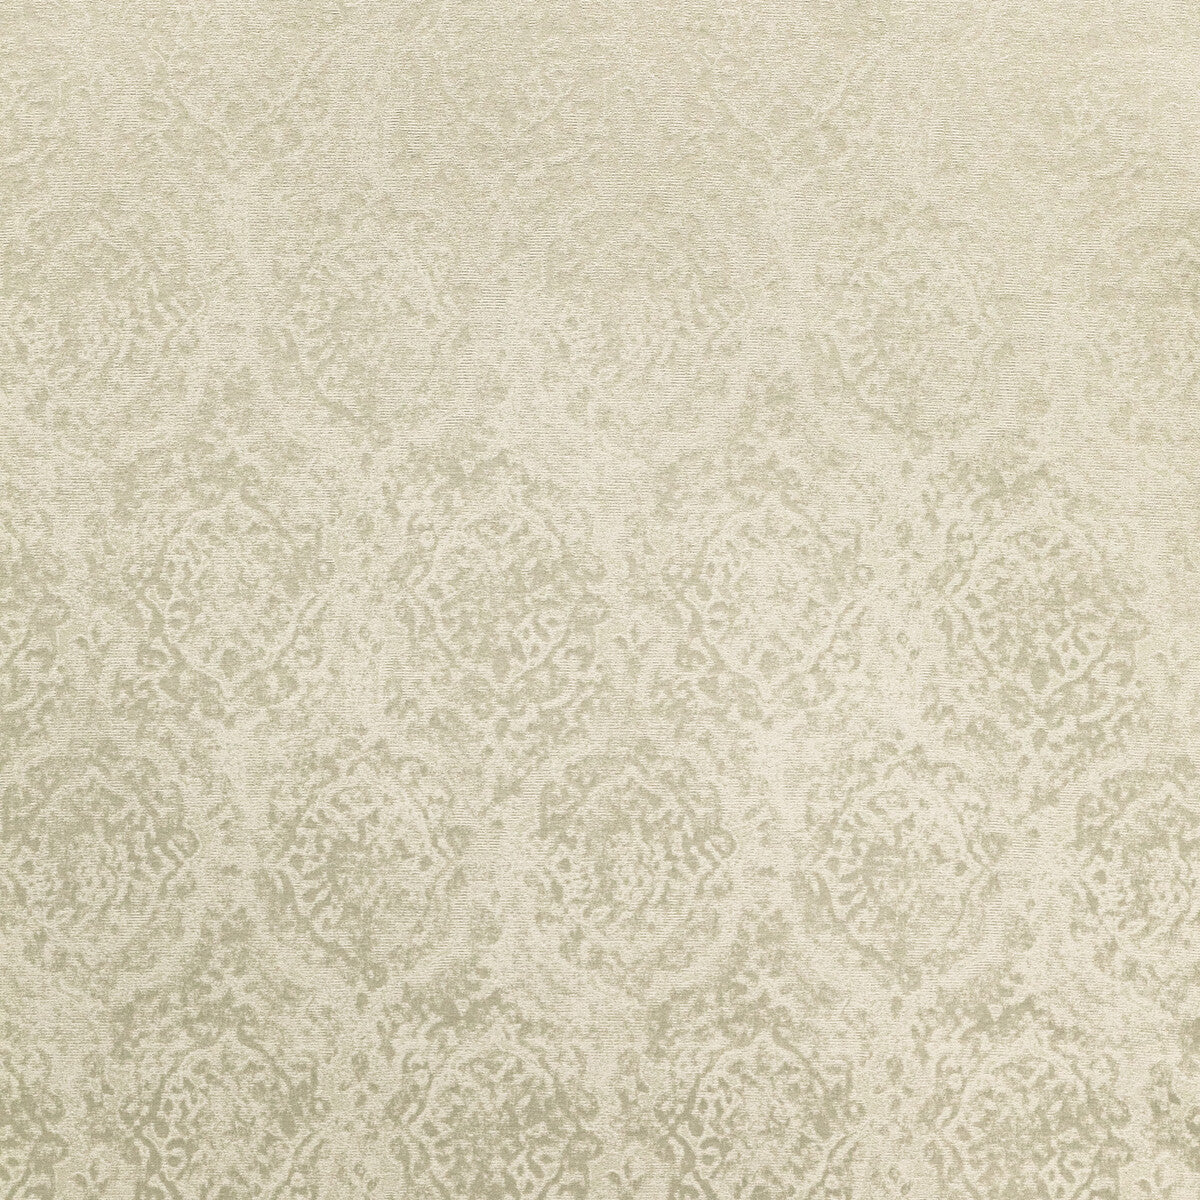 Omni Damask fabric in cream color - pattern 36577.16.0 - by Kravet Couture in the Modern Luxe Silk Luster collection